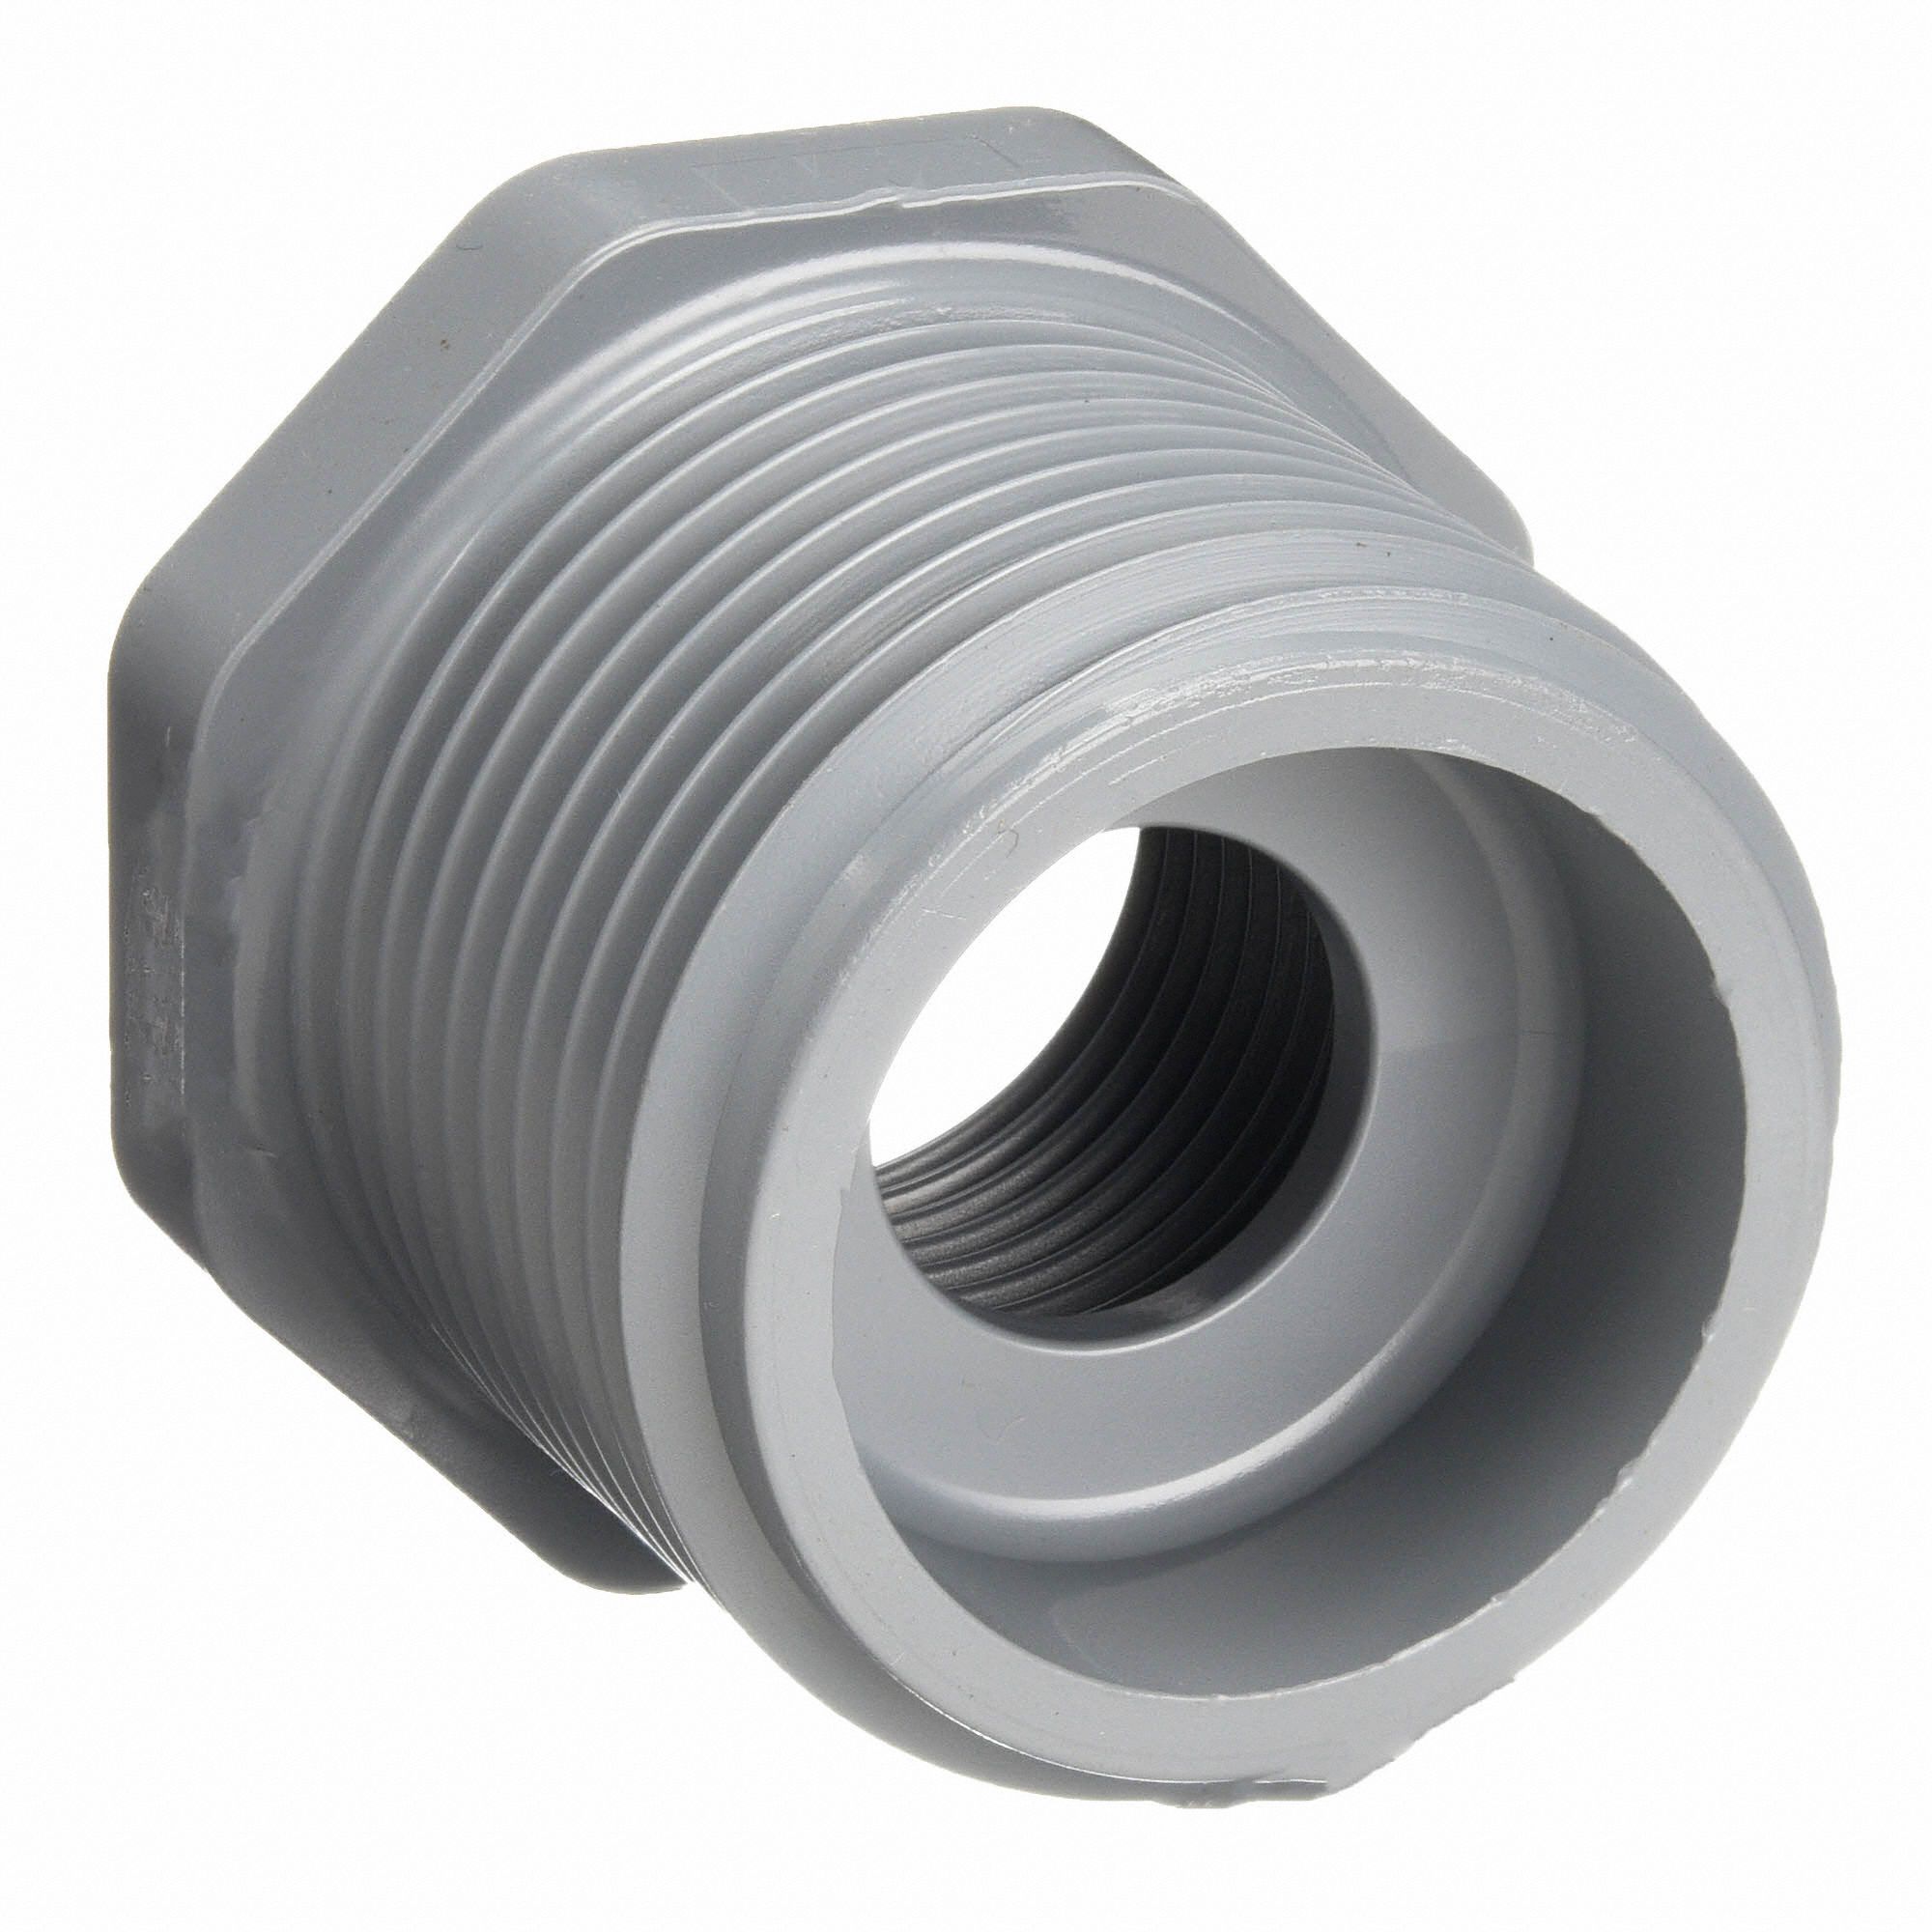 GF PIPING SYSTEMS Reducer Bushing, CPVC, Fitting Schedule/Class ...